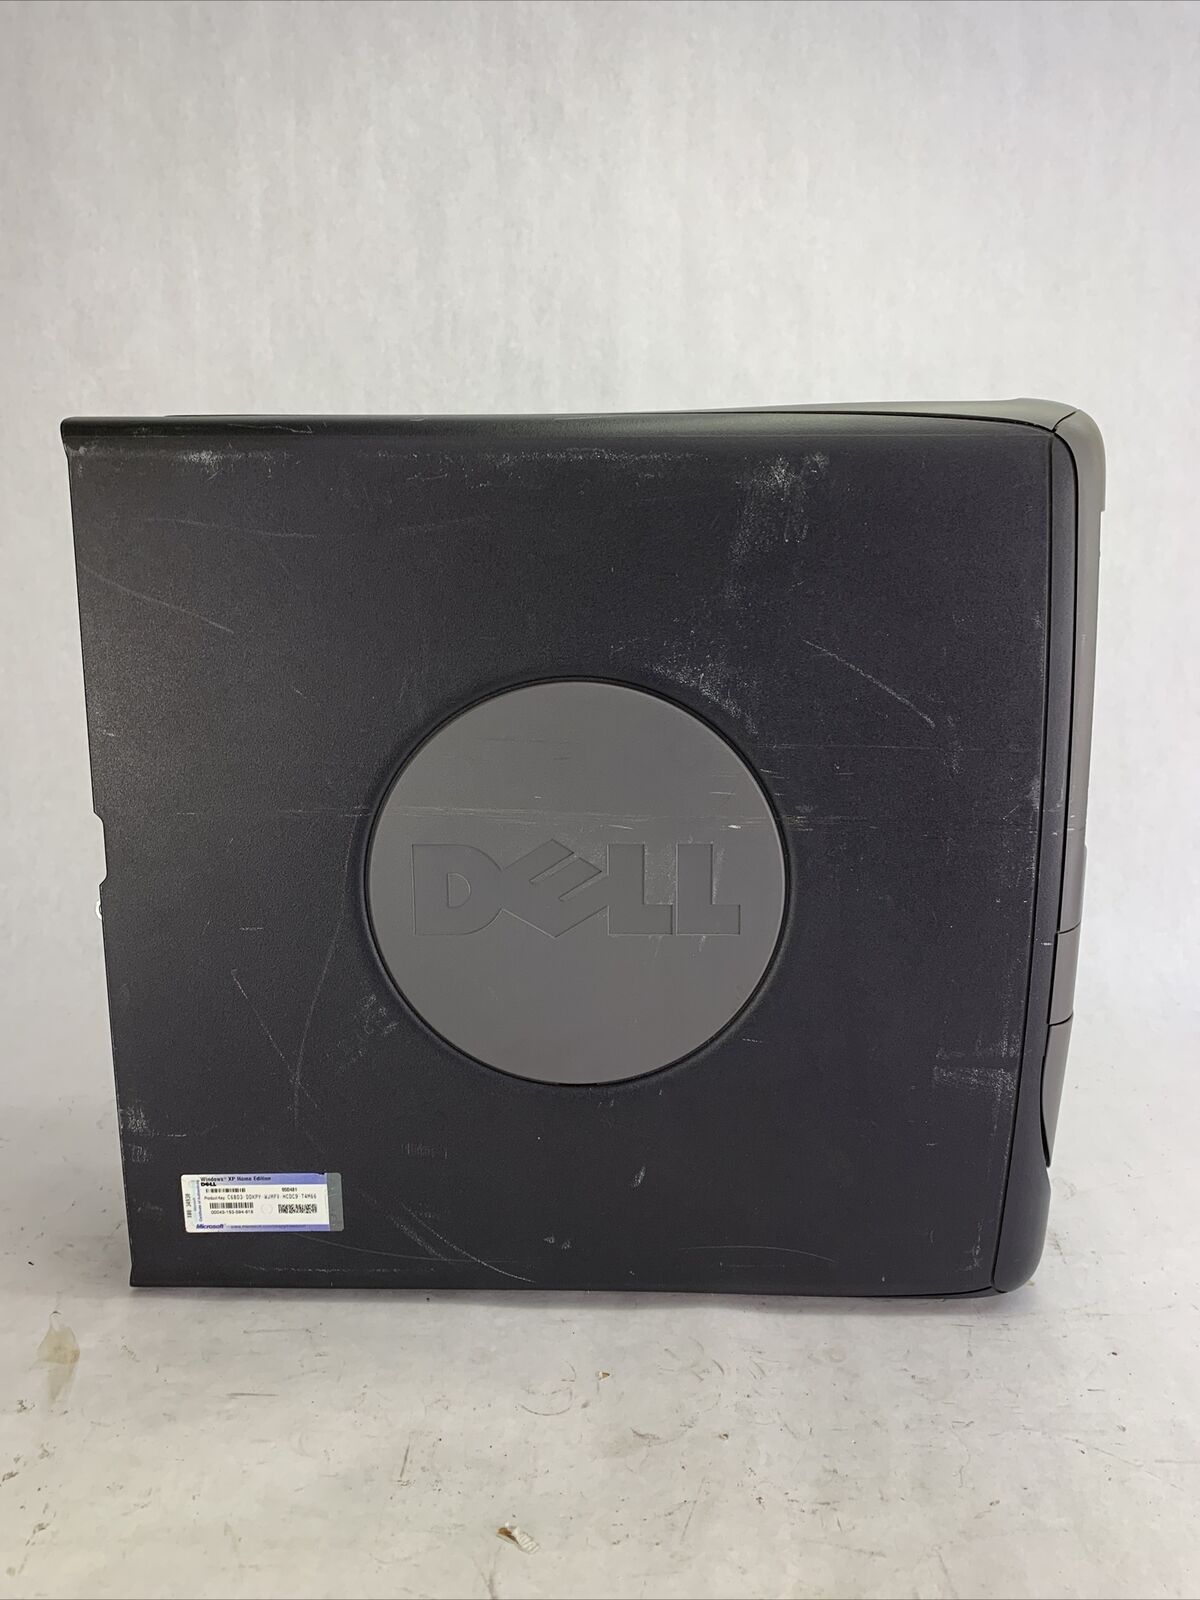 Dell Dimension 4300S DT Intel Pentium 4 1.4GHz 256MB RAM No HDD No OS